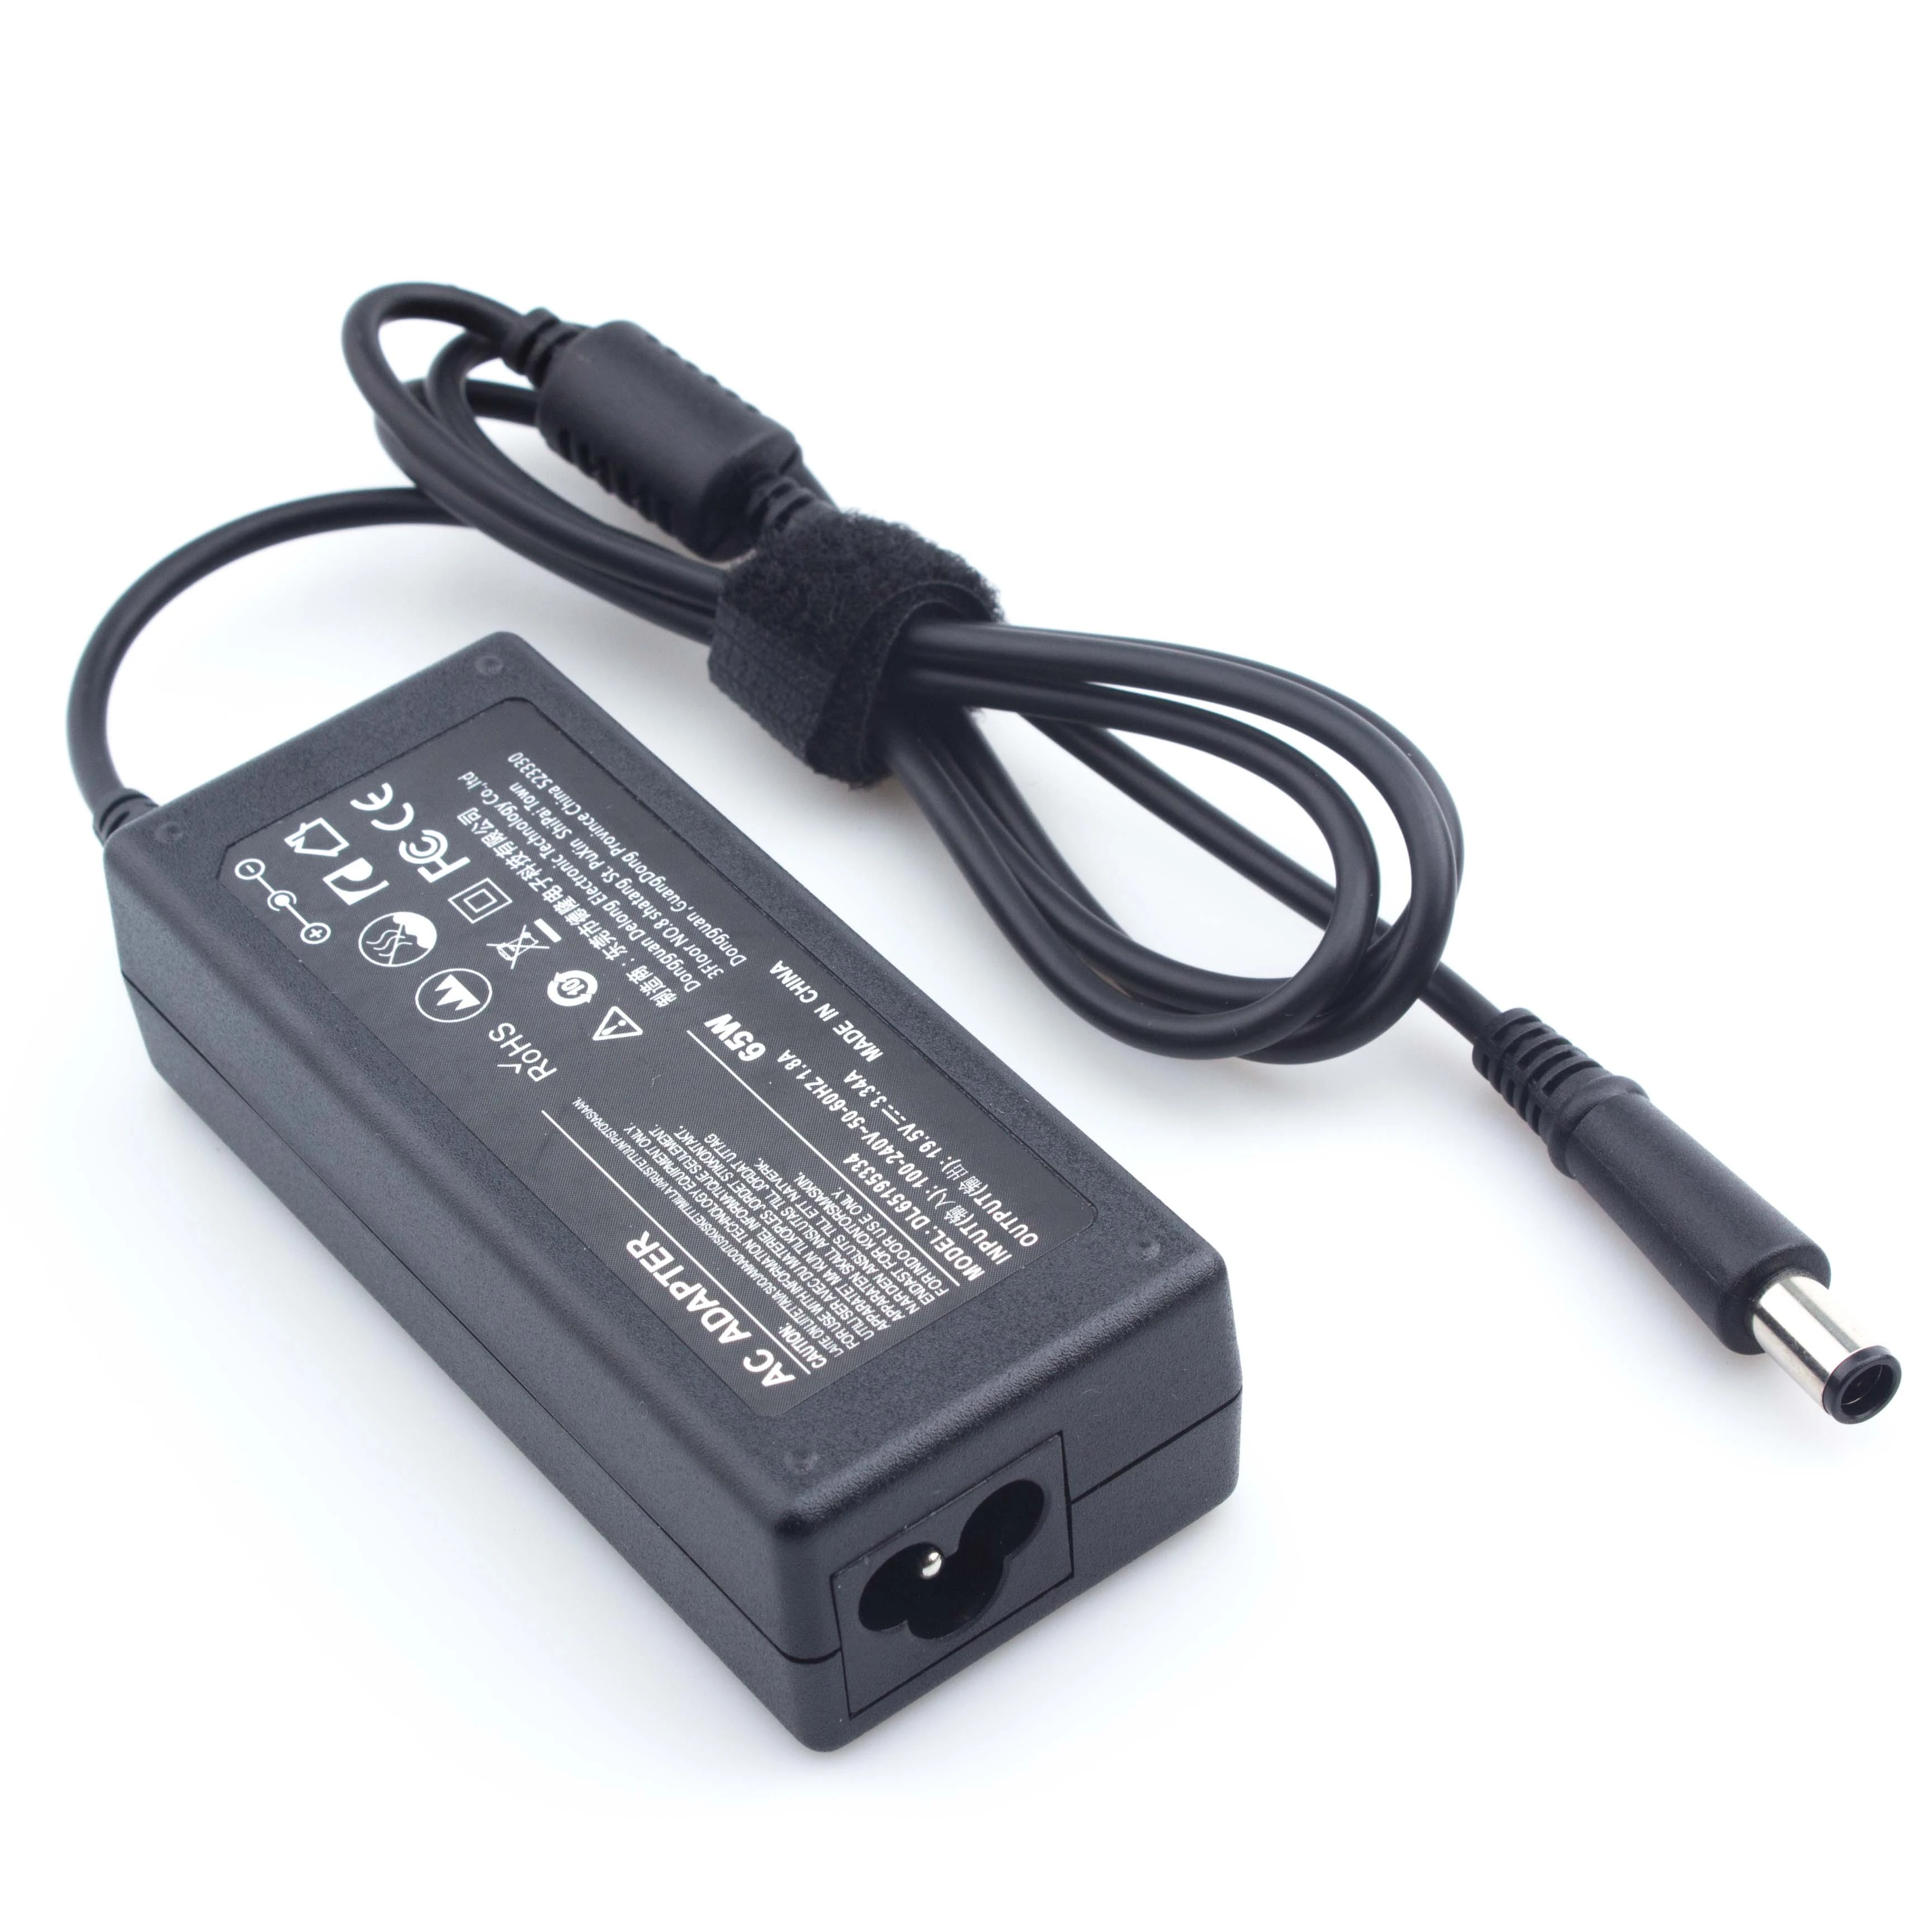   65w Ac Adapter Laptop Charger Power Supply For Dell Inspiron  17r 5737 5721 14 3421 5421 14r 5437 5421 N5110 N5010 - Buy   65w Ac  Adapter,Ac Adapter Laptop